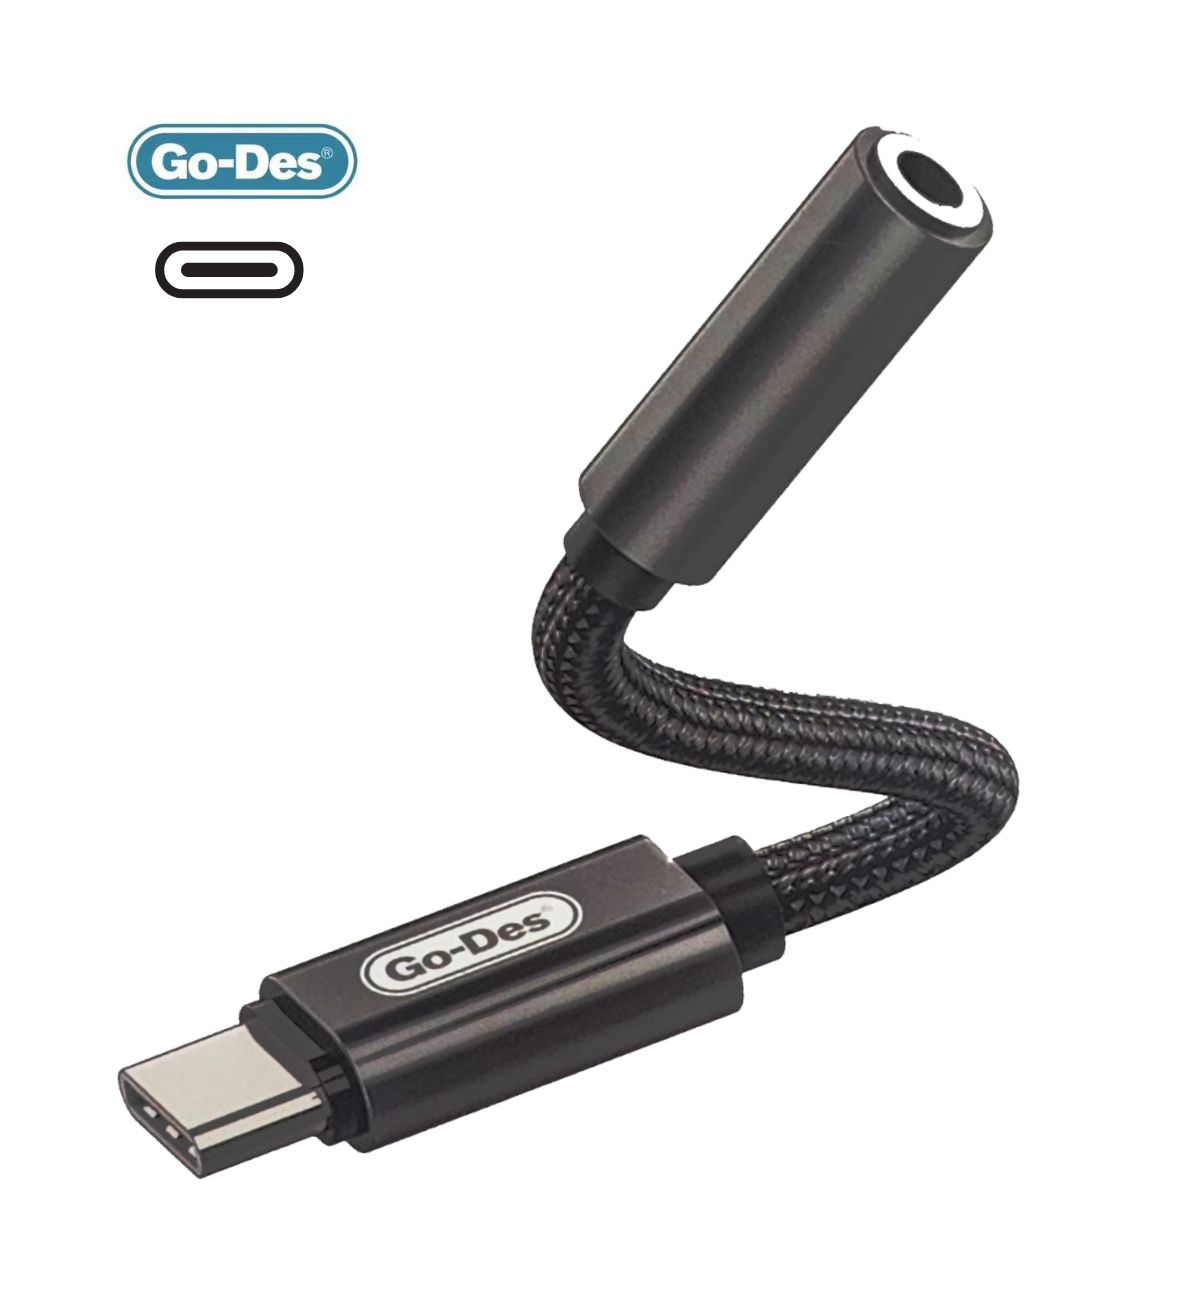 Go-Des USB C to Audio Adapter 3.5mm This adapter allows you to connect your USB-C device to headphones or other audio devices with a standard 3.5mm jack.